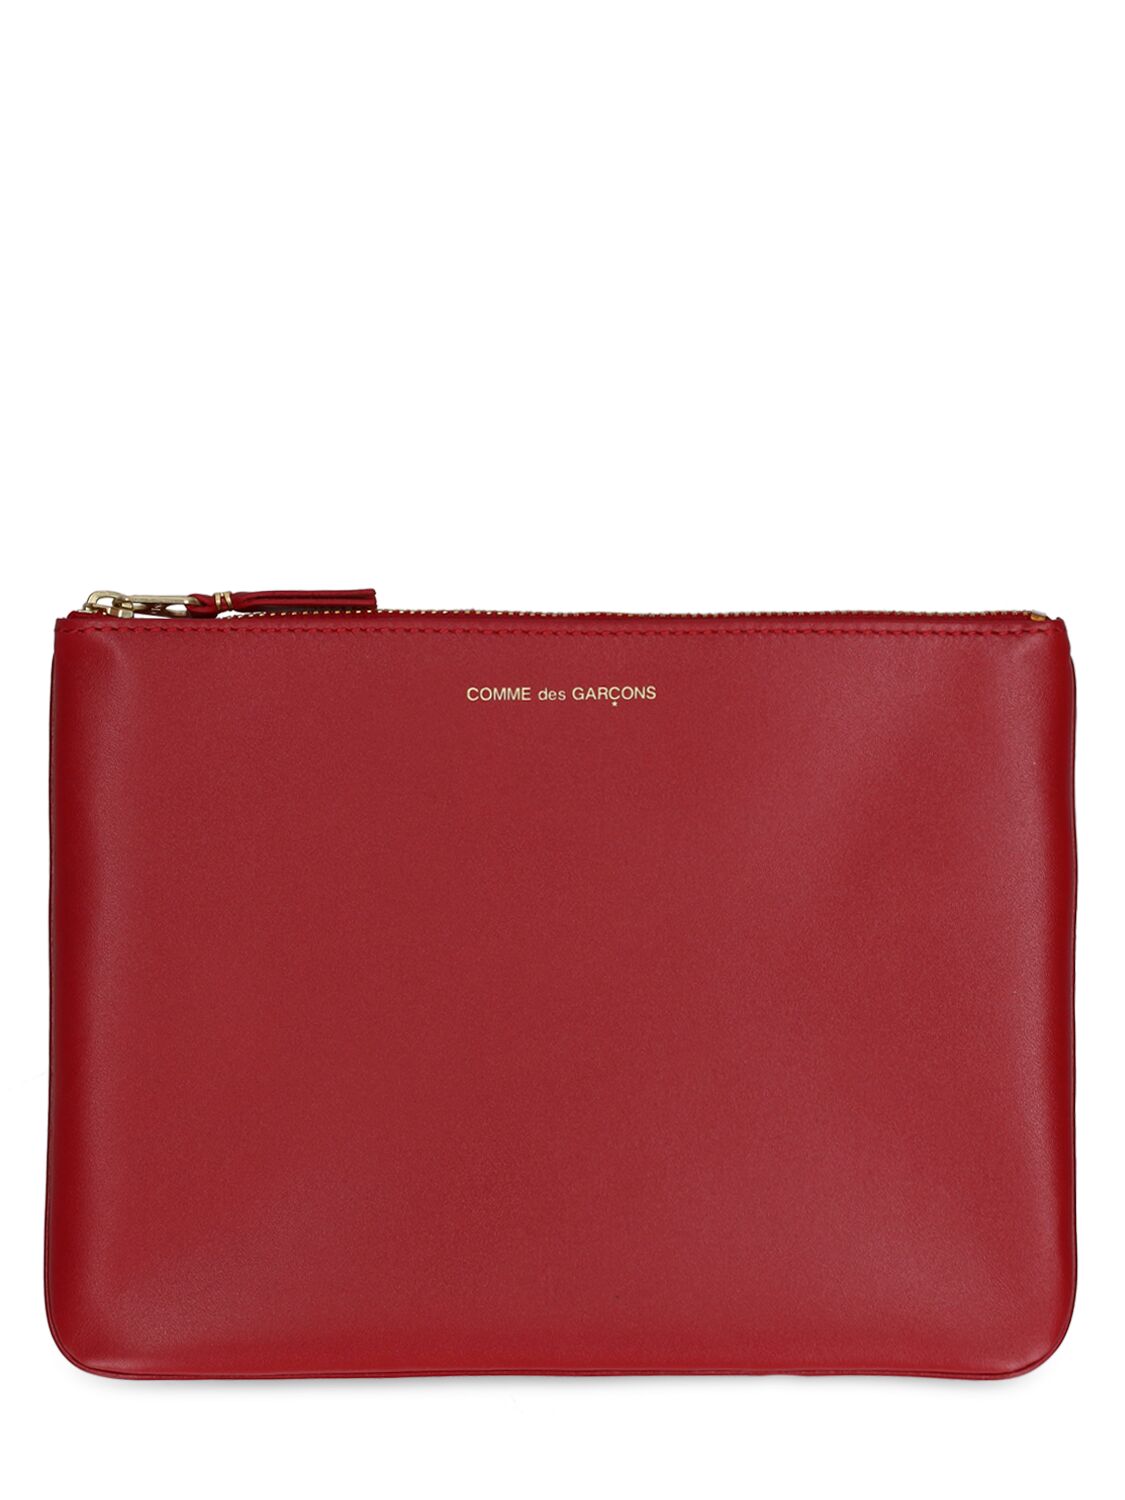 Comme Des Garçons Classic Leather Line Wallet In Red